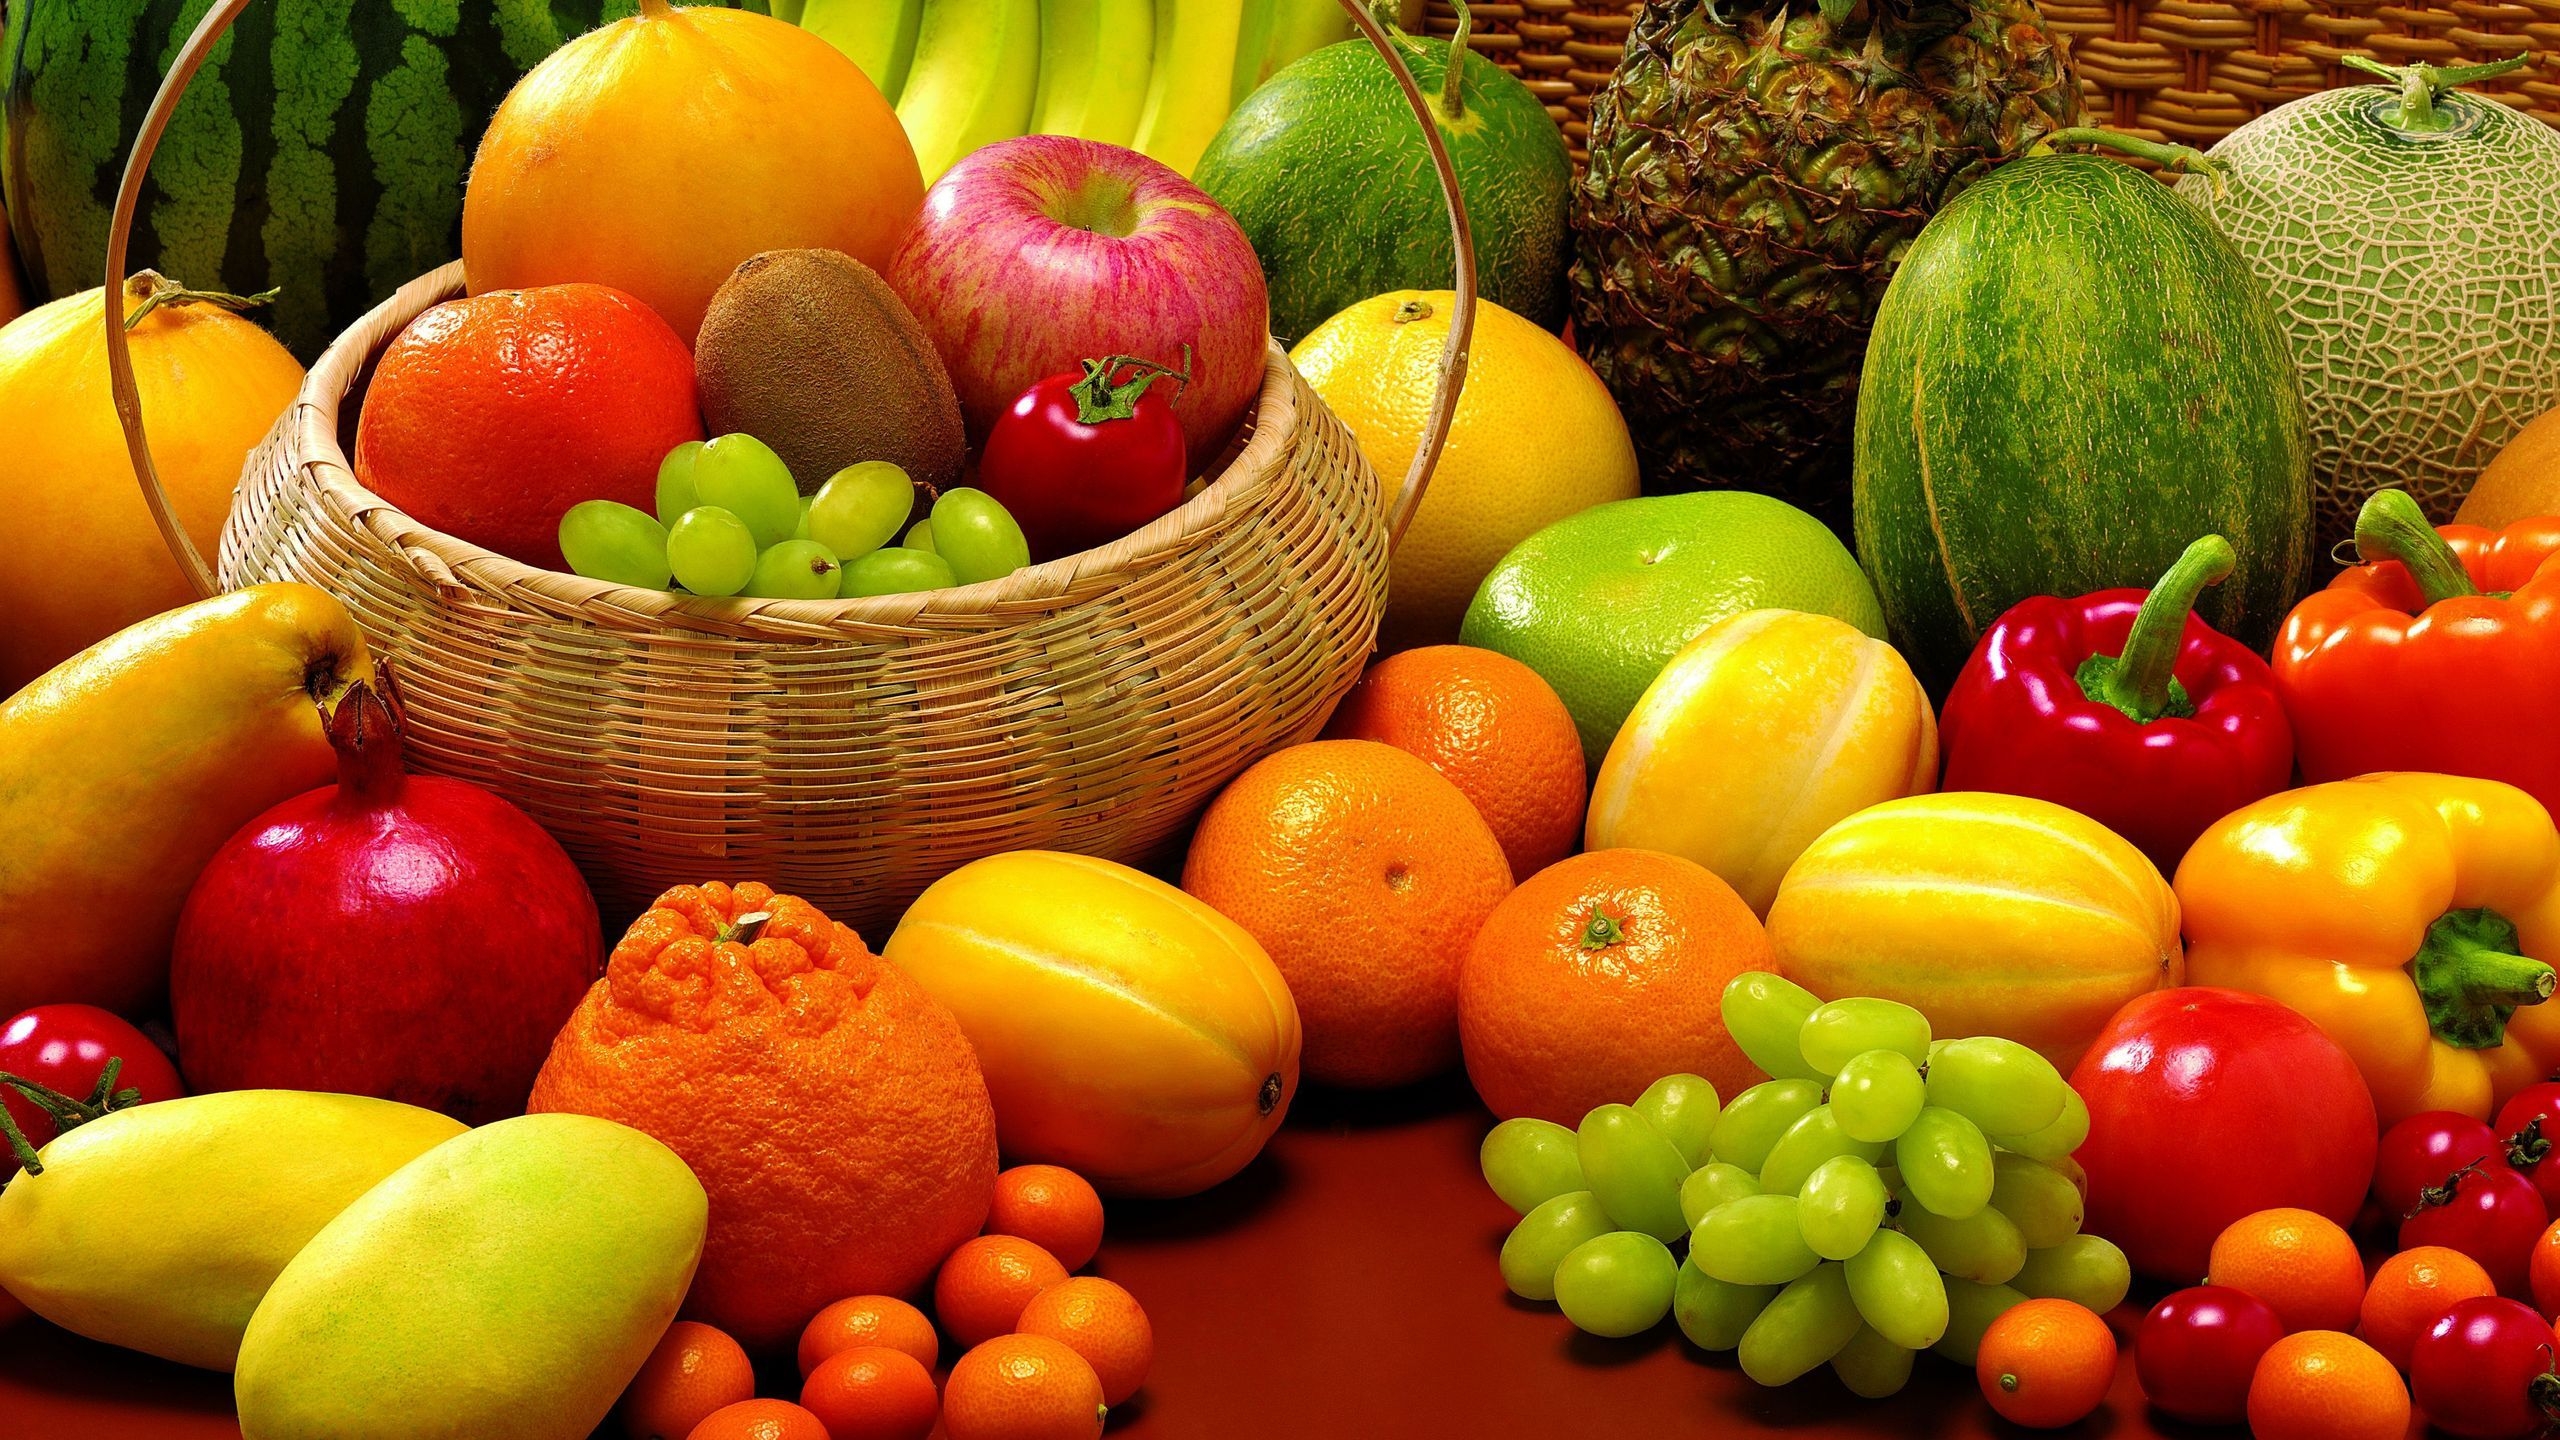 Fruits and Veggies for 2560x1440 HDTV resolution